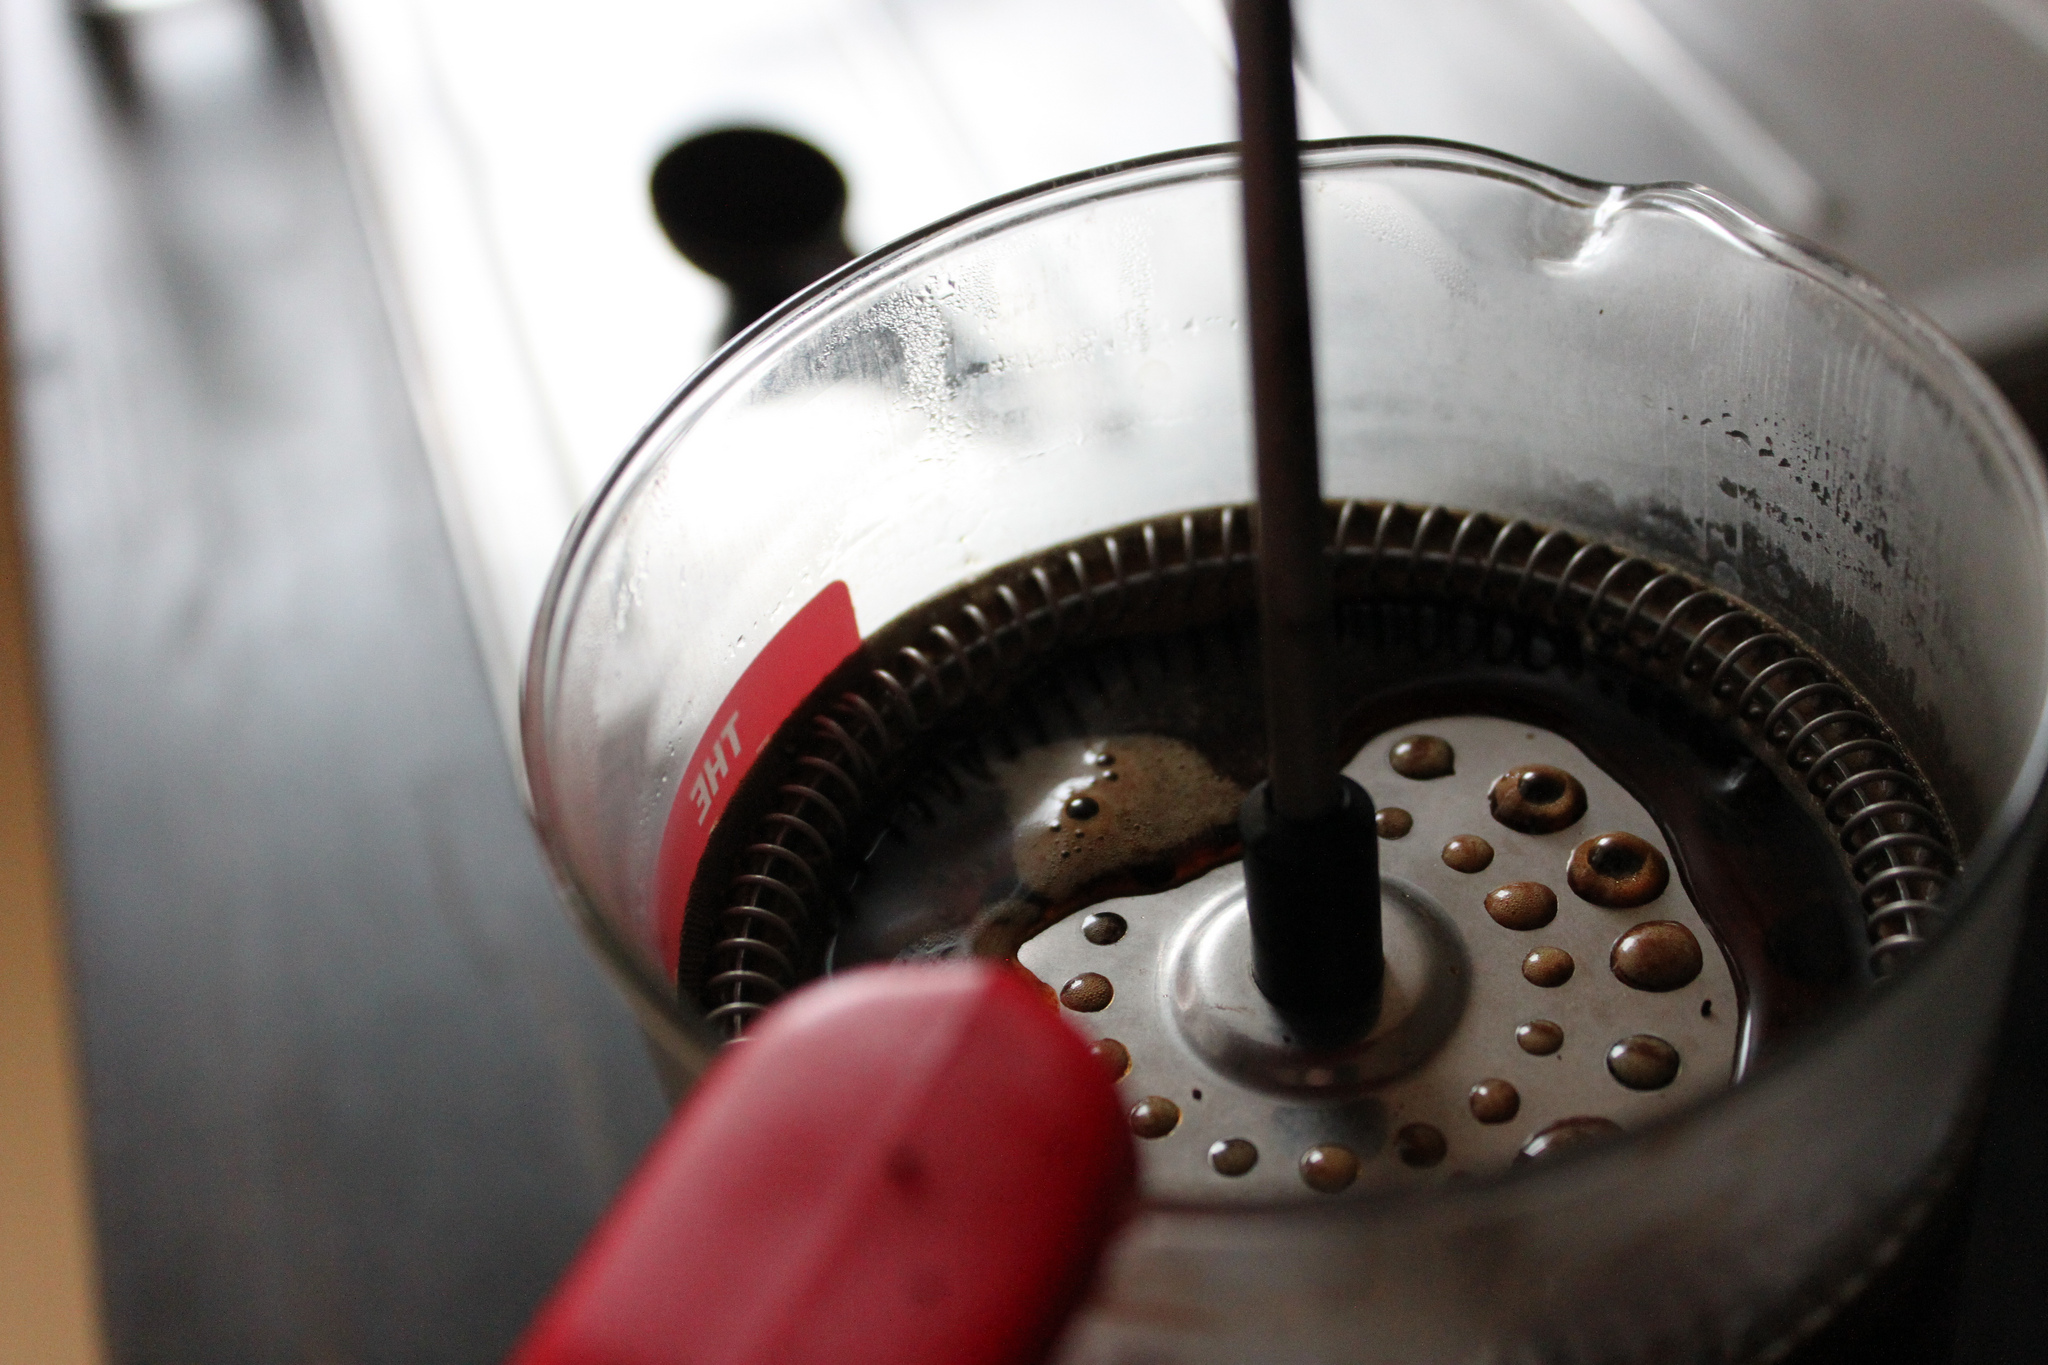 How to Clean a French Press